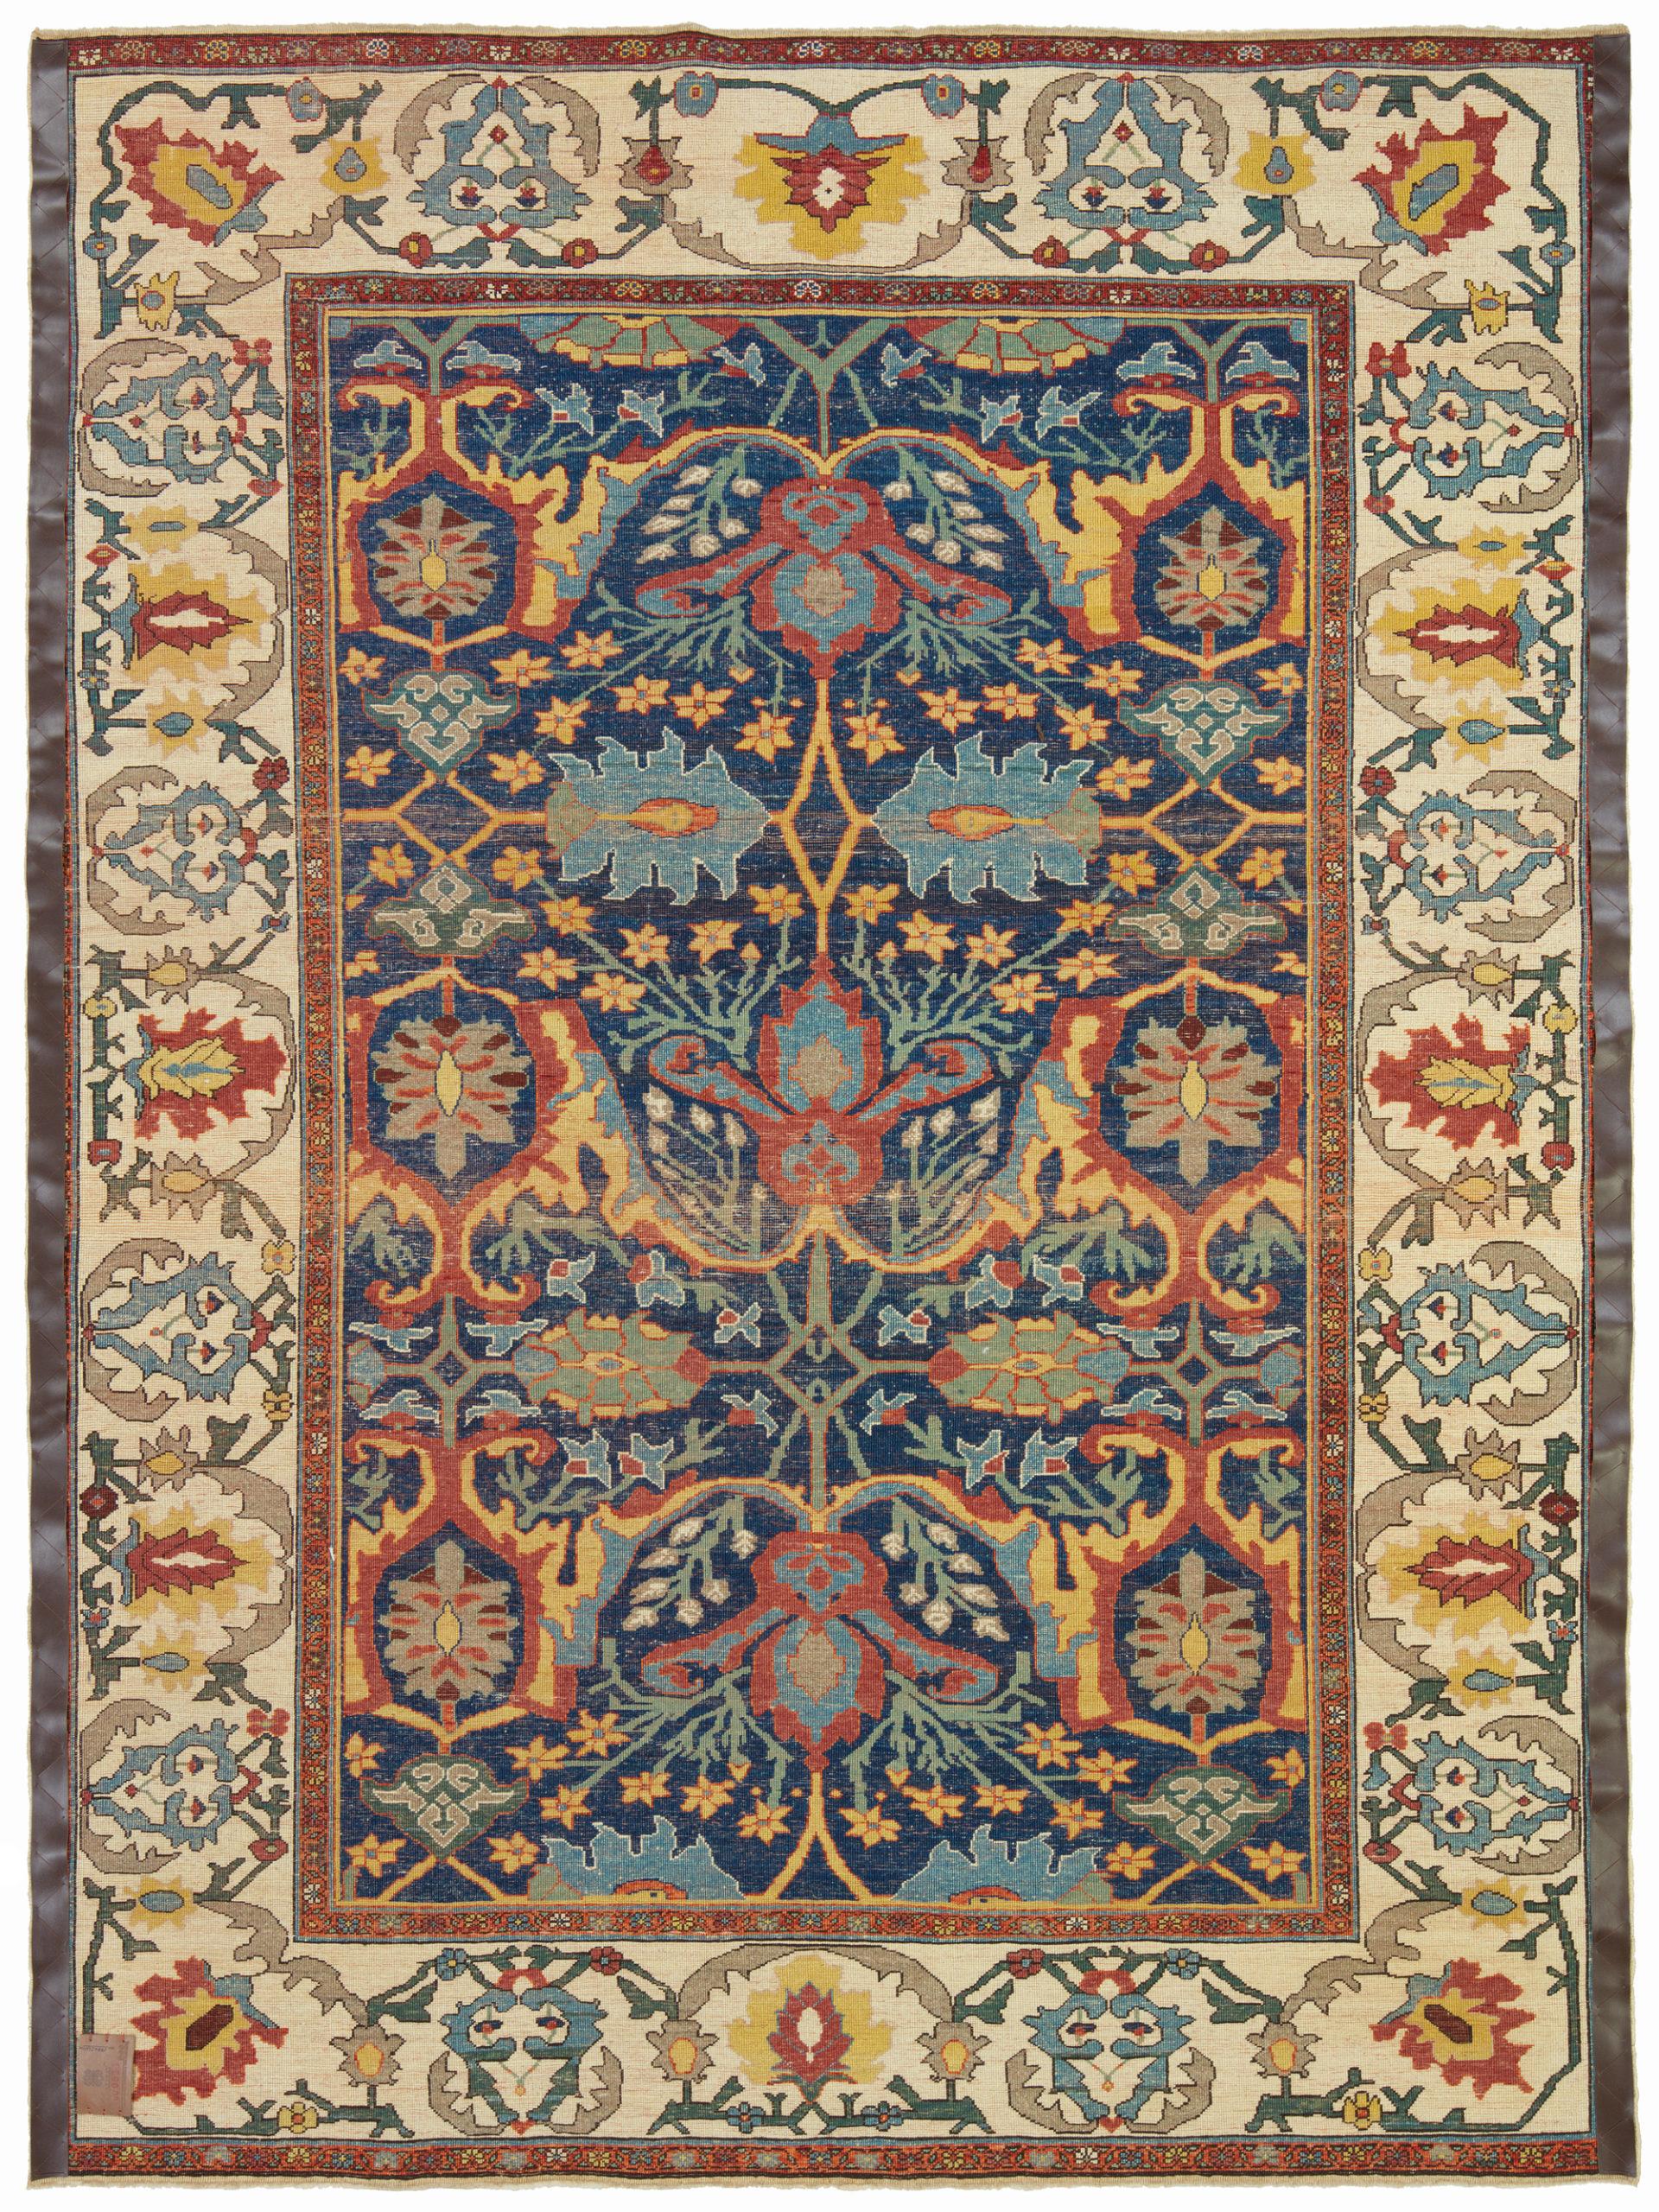 This is a Bidjar rug designed in the 19th century from the Bidjar region, also known as Bijar, which is a region in northwestern Iran known for producing some of the finest and most durable rugs in the world. During the 19th century, Bidjar rugs